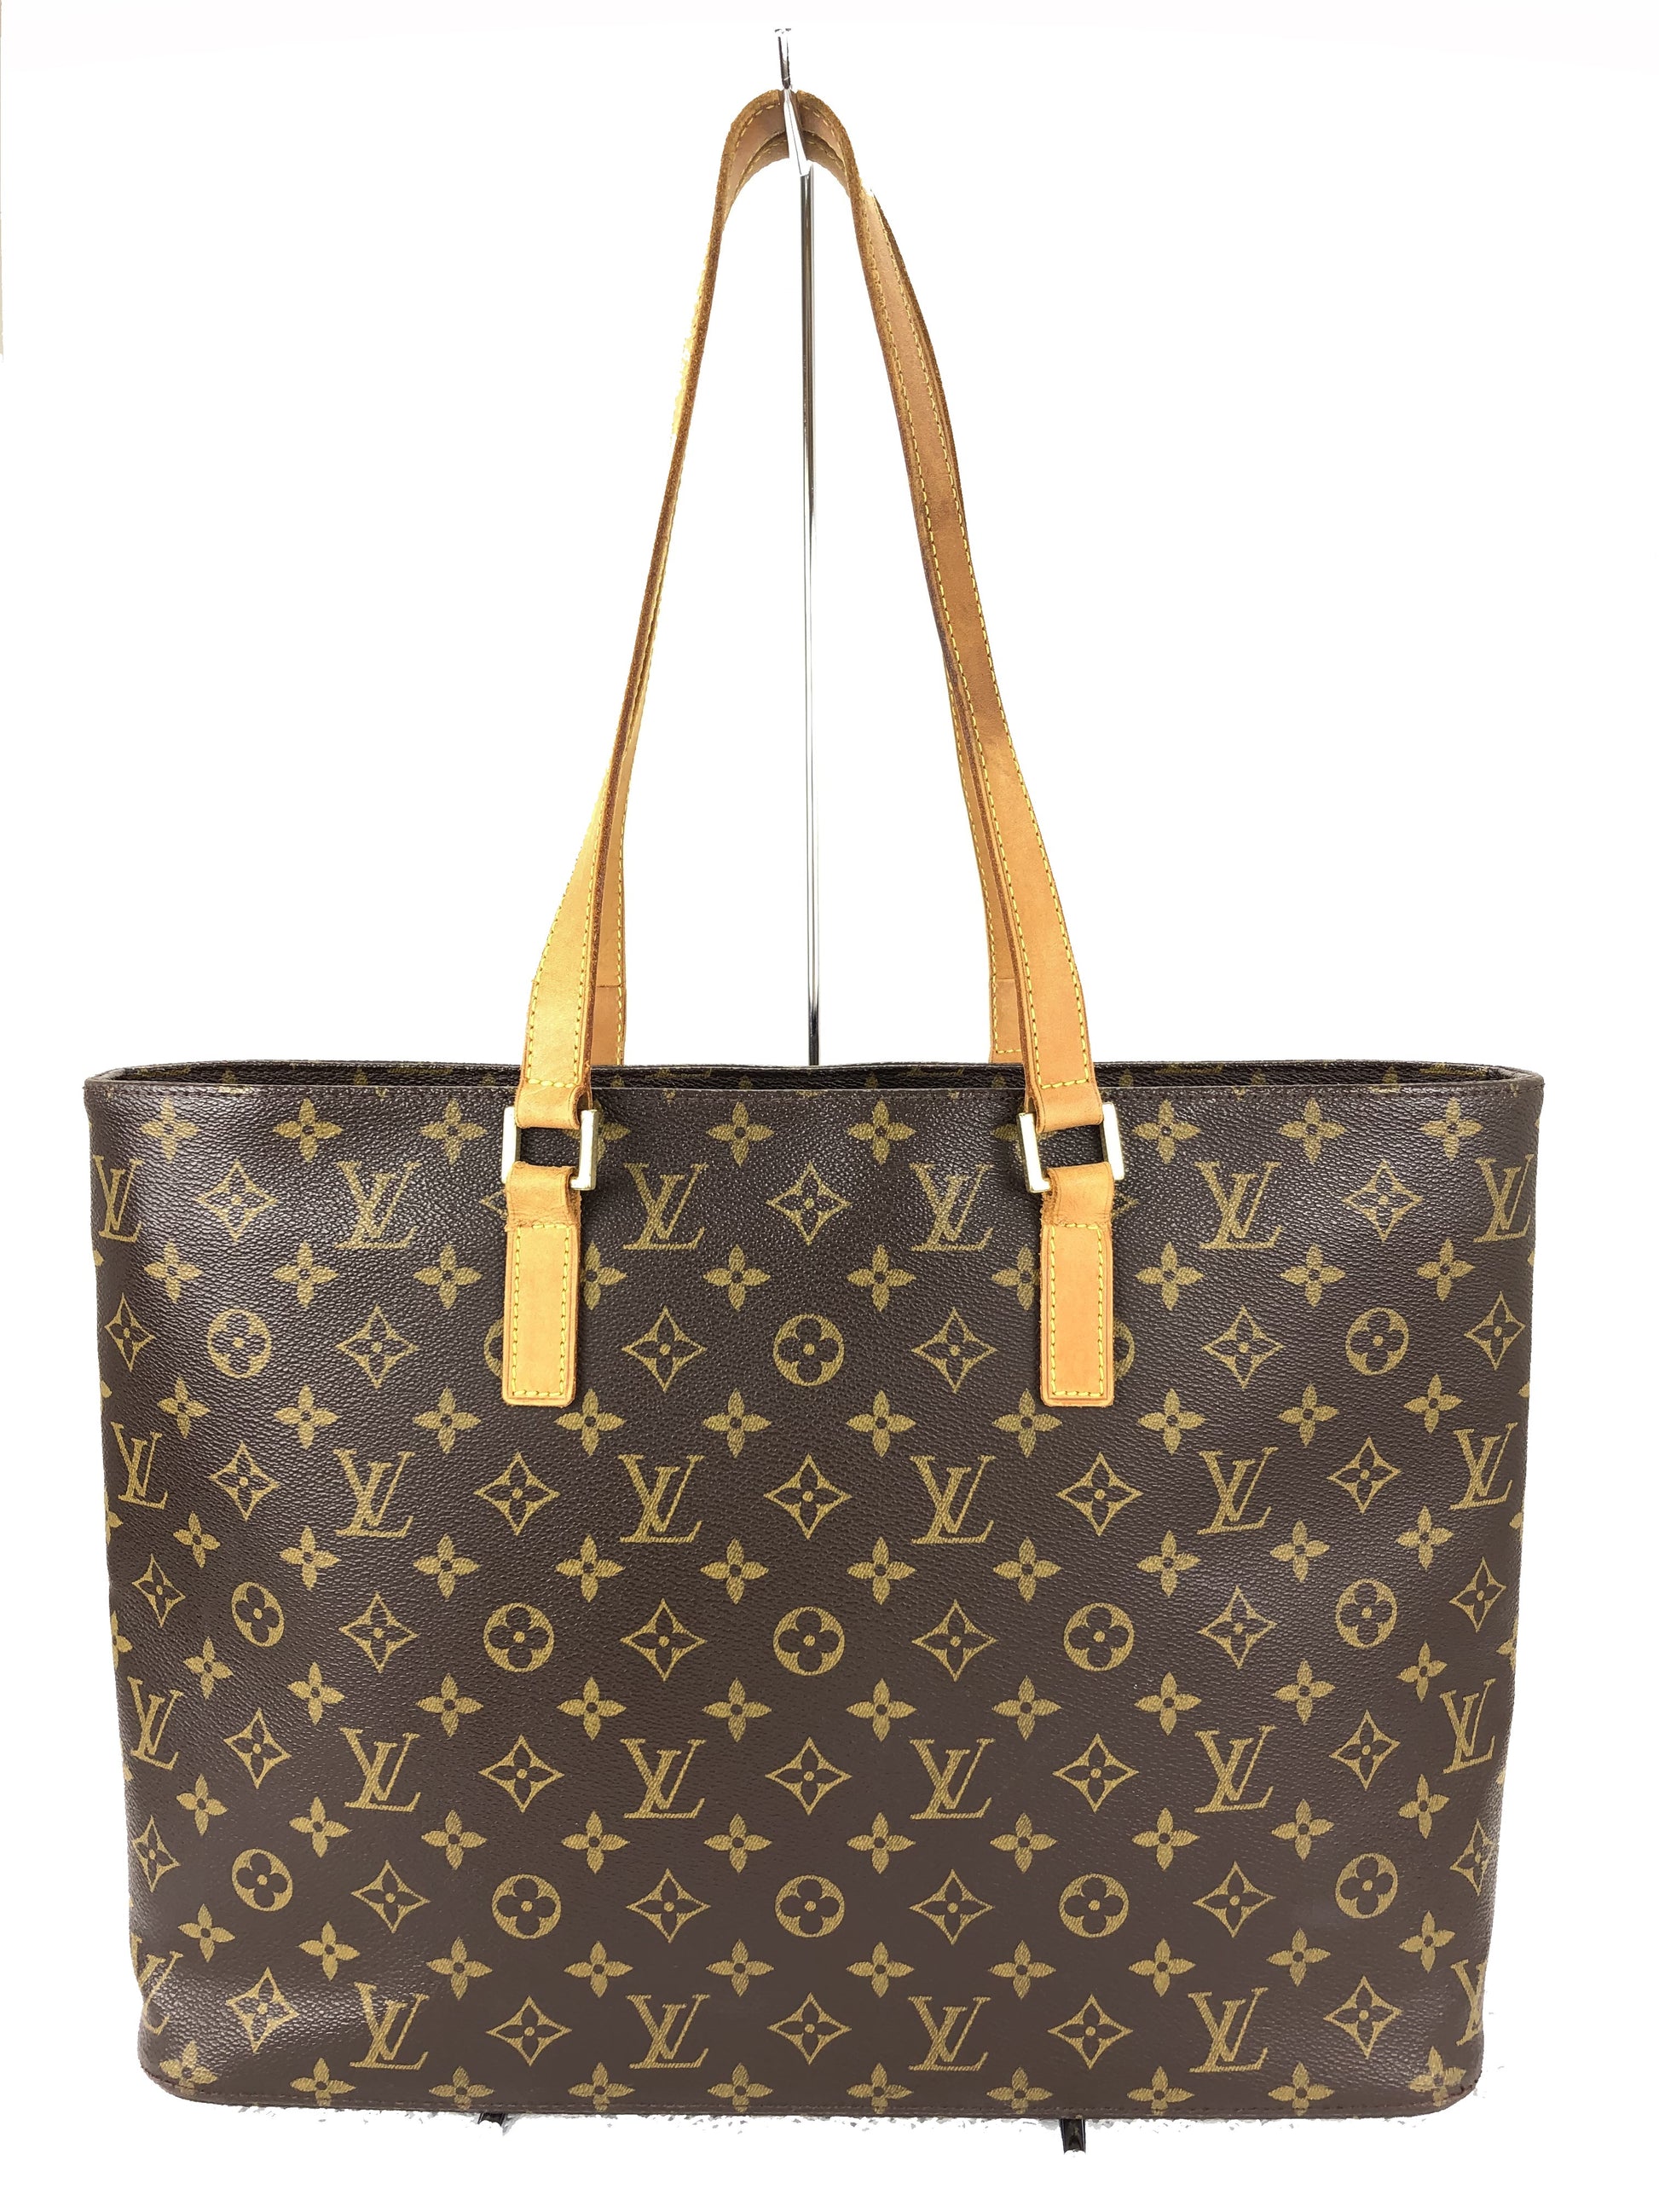 LOUIS VUITTON Tote Bag M51155 Brown Monogram Luco from japan used